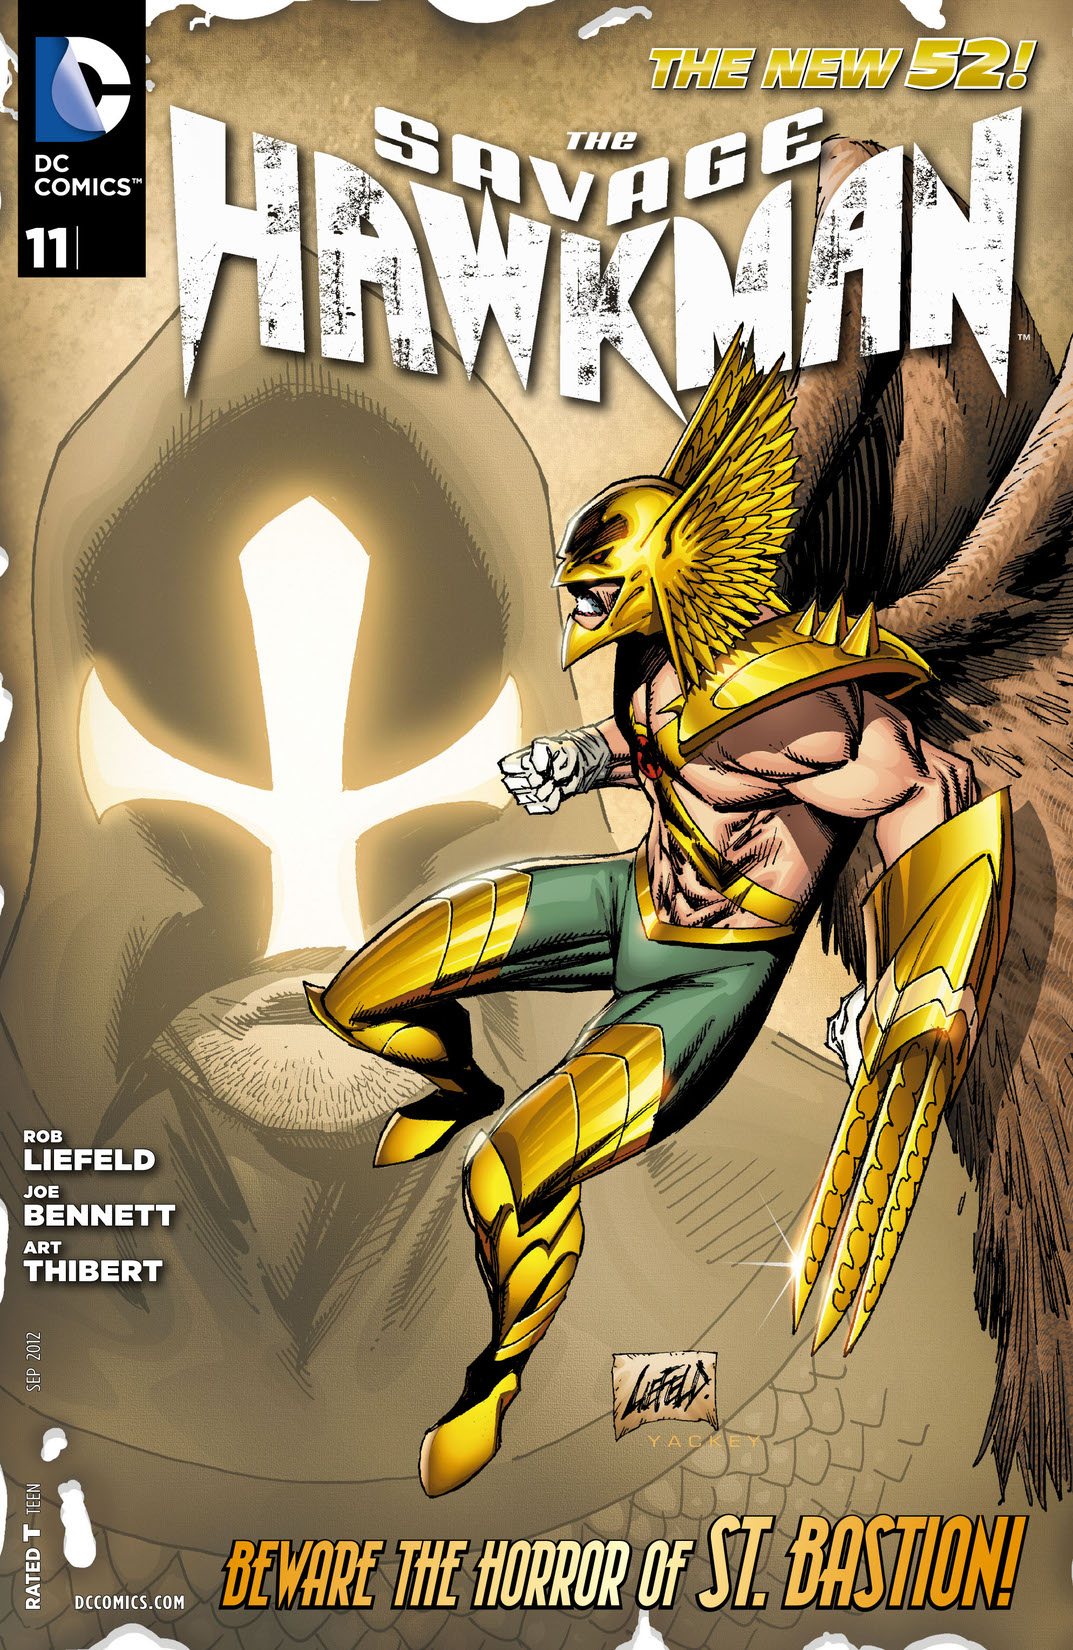 The Savage Hawkman #11 preview images